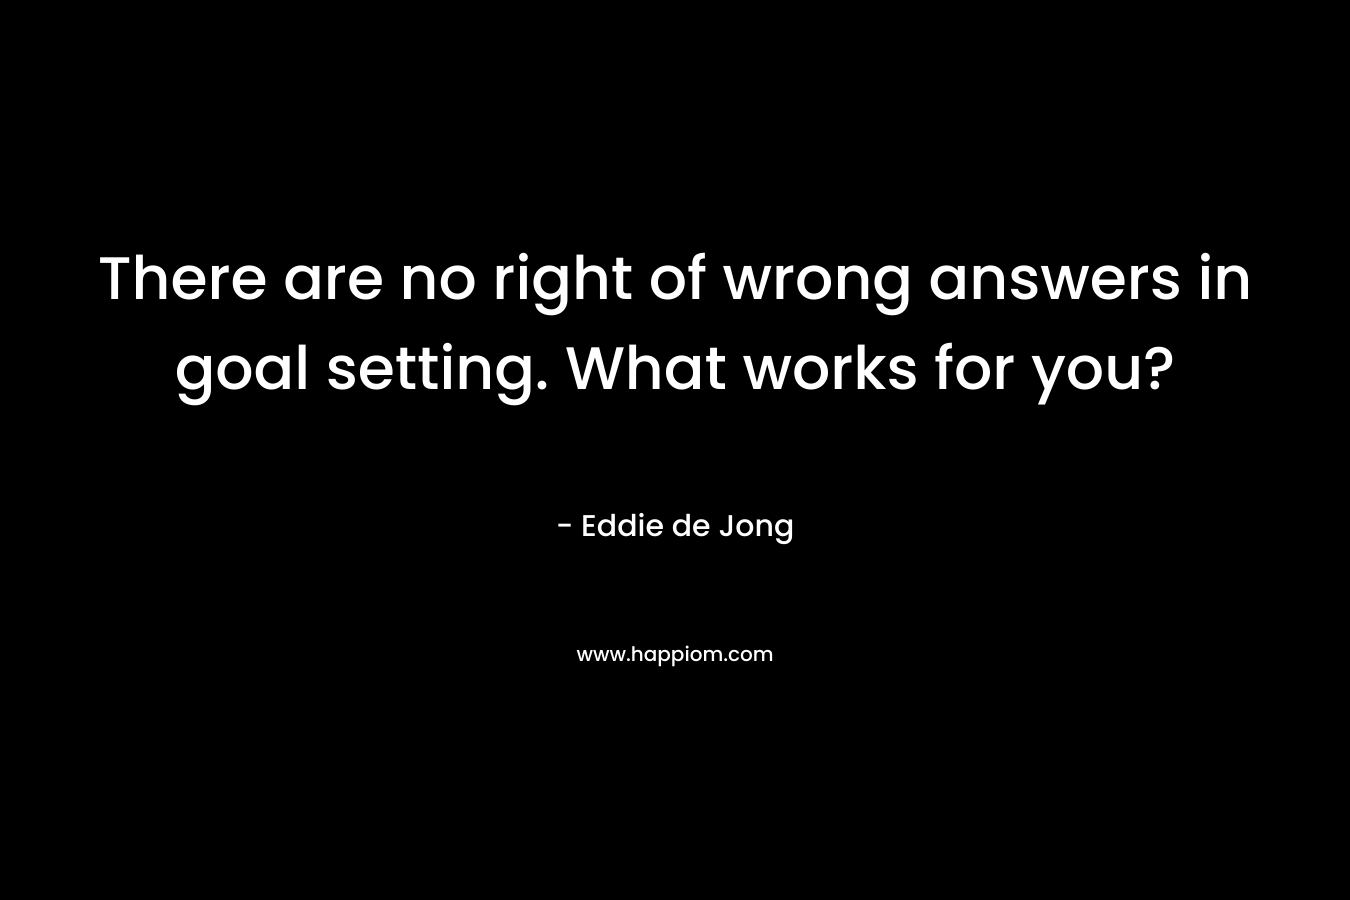 There are no right of wrong answers in goal setting. What works for you?